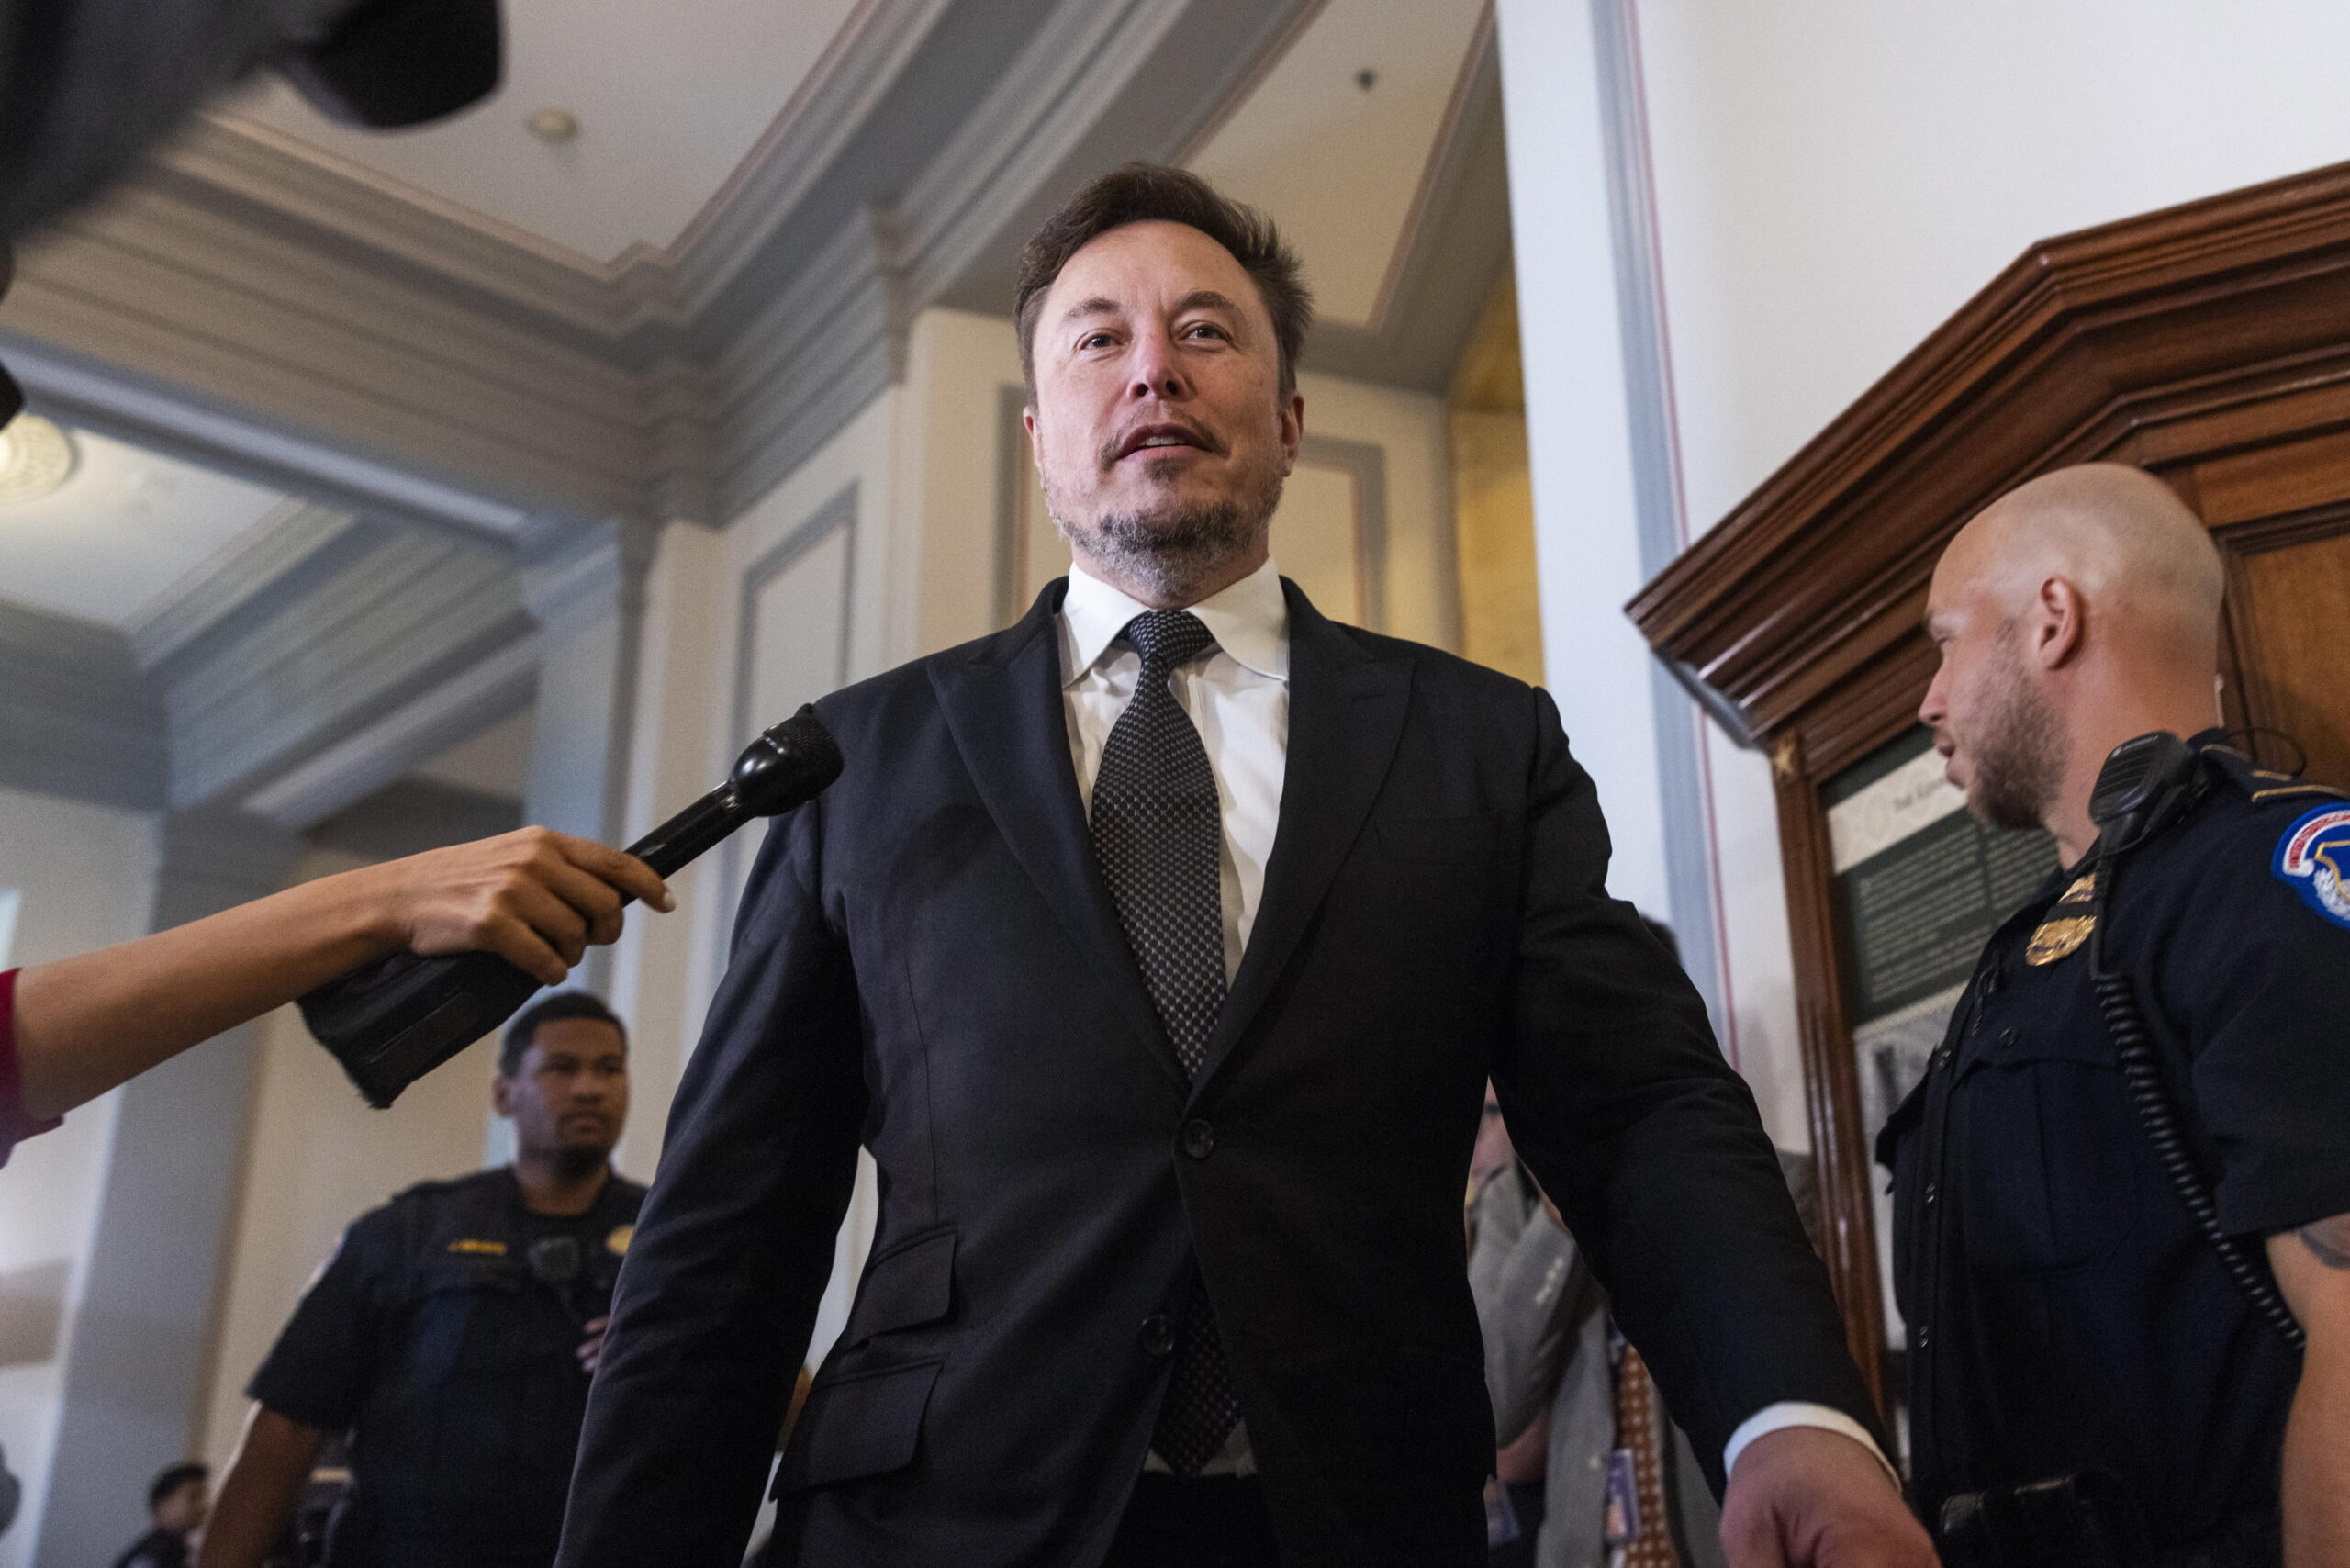 X’s farewell to Europe?  Musk denies the rumours: “It’s false.”